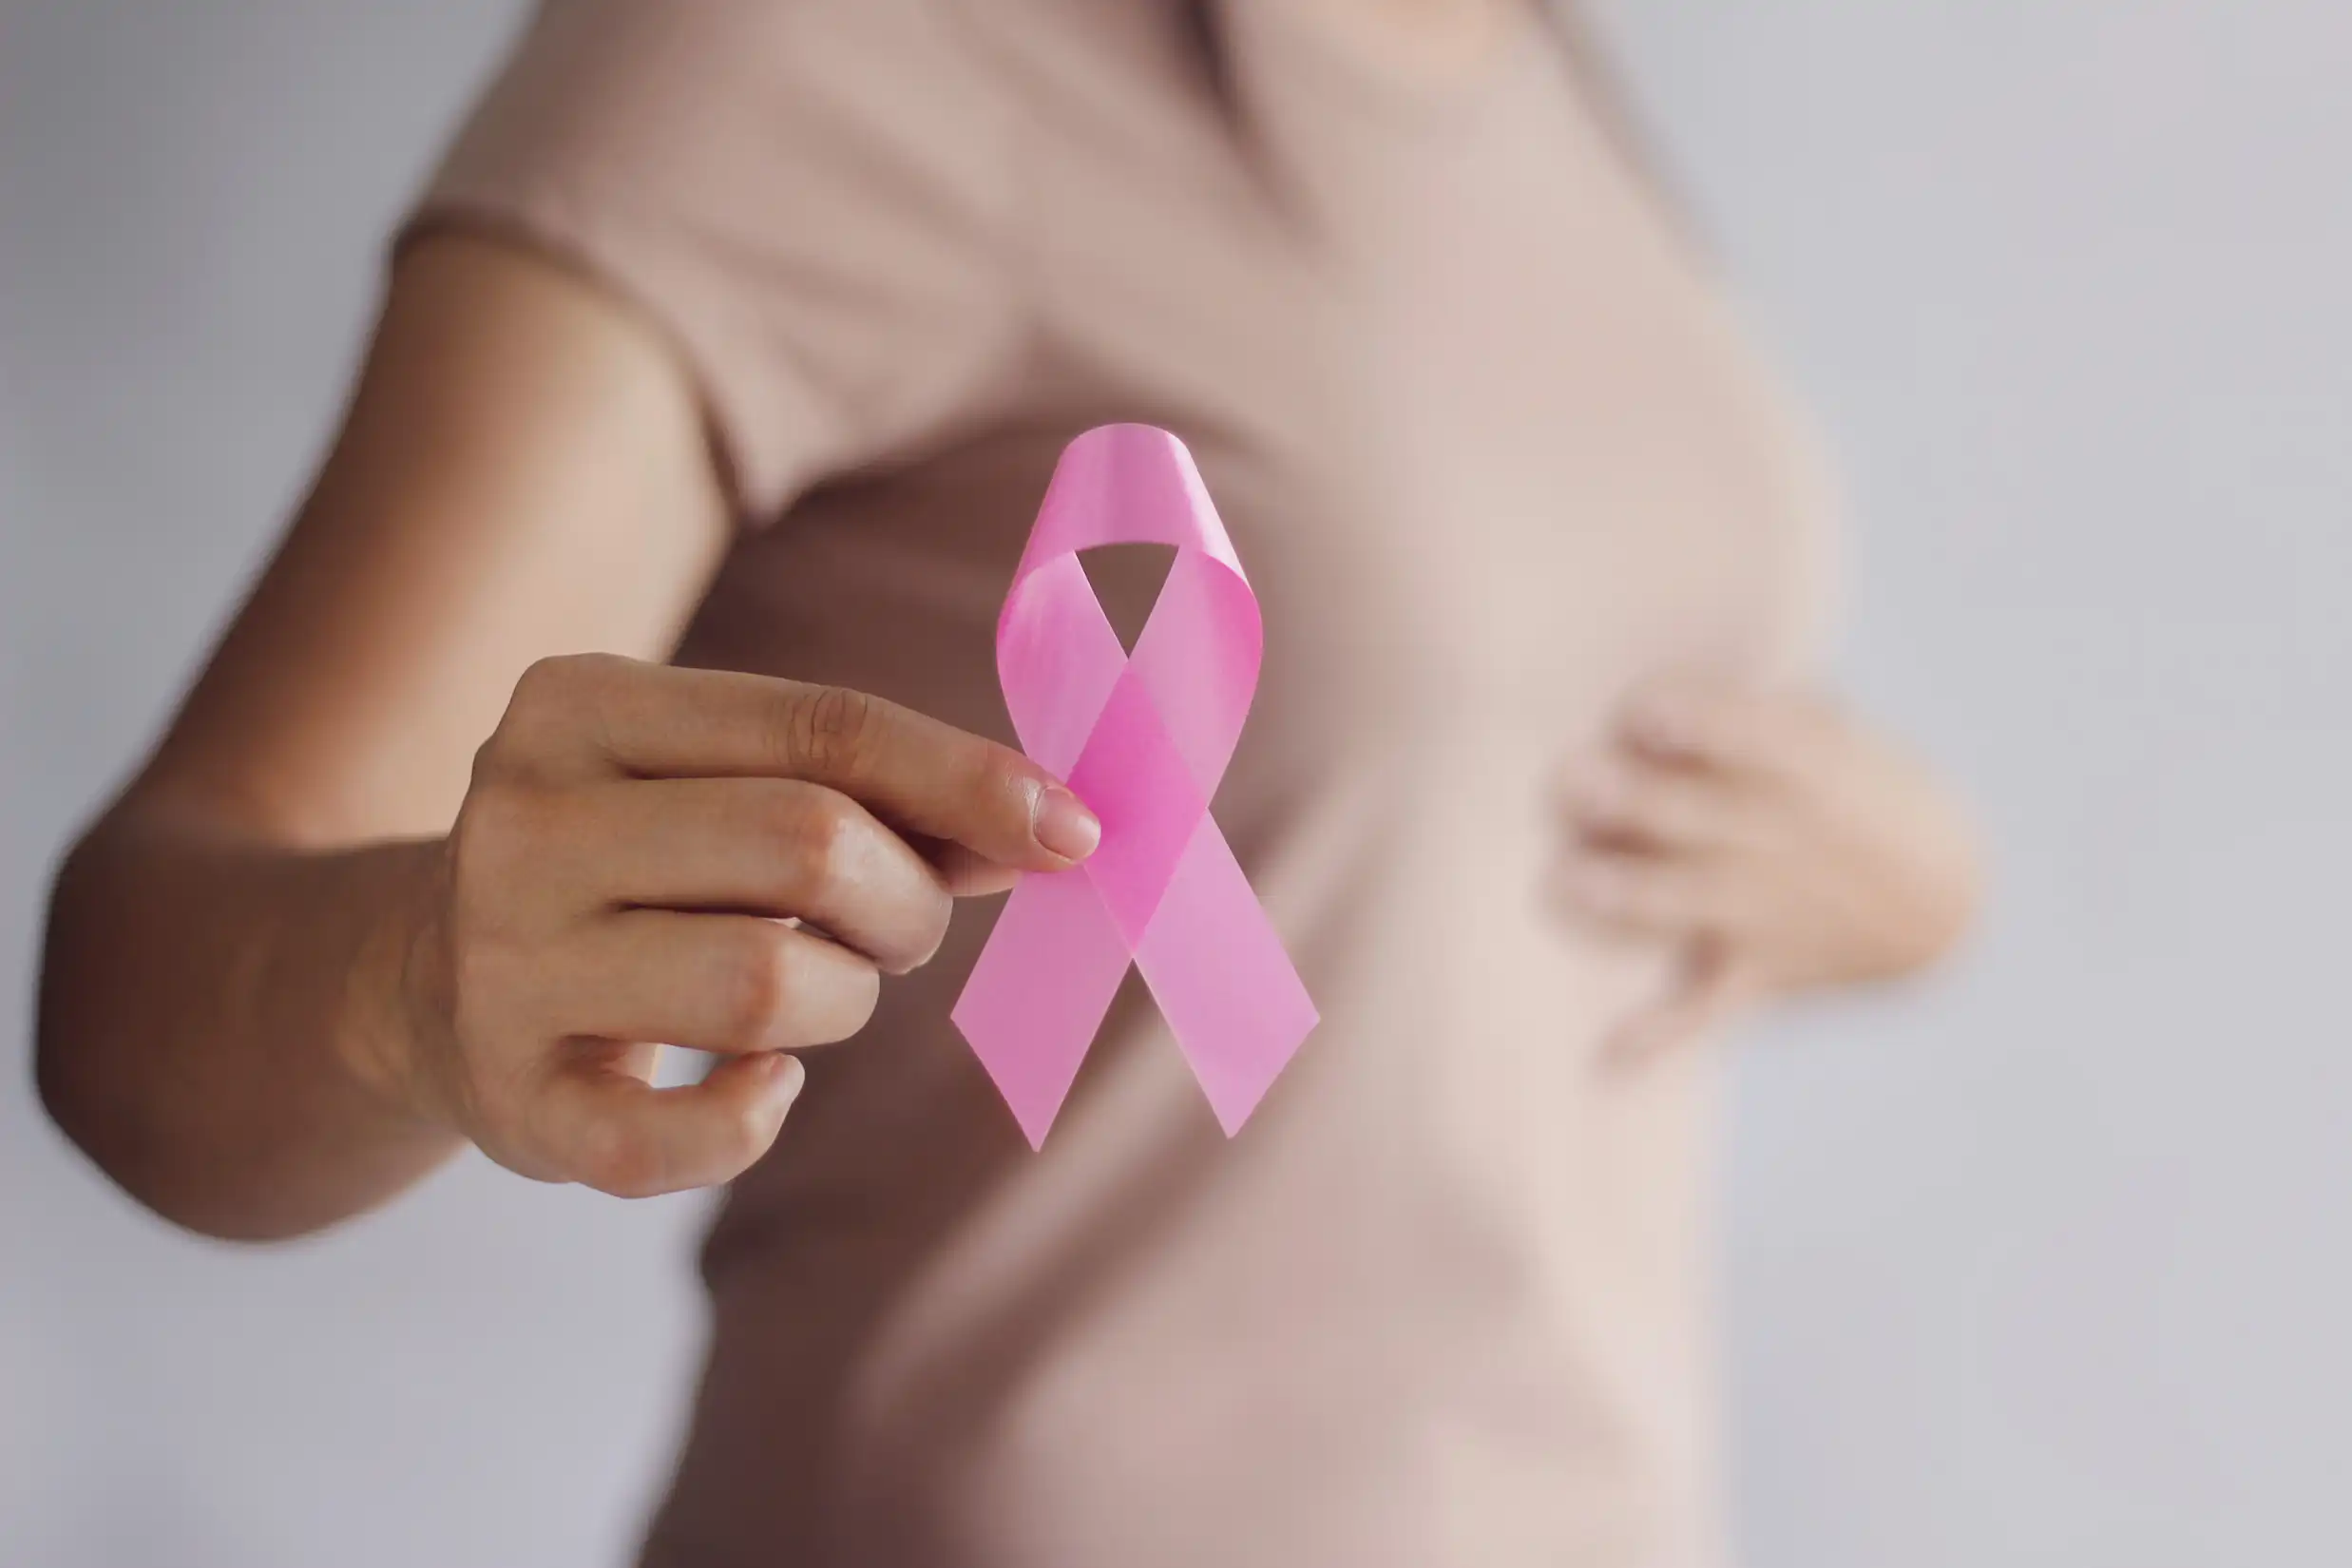 Nourish and Protect: How Your Diet Can Help Prevent Breast Cancer